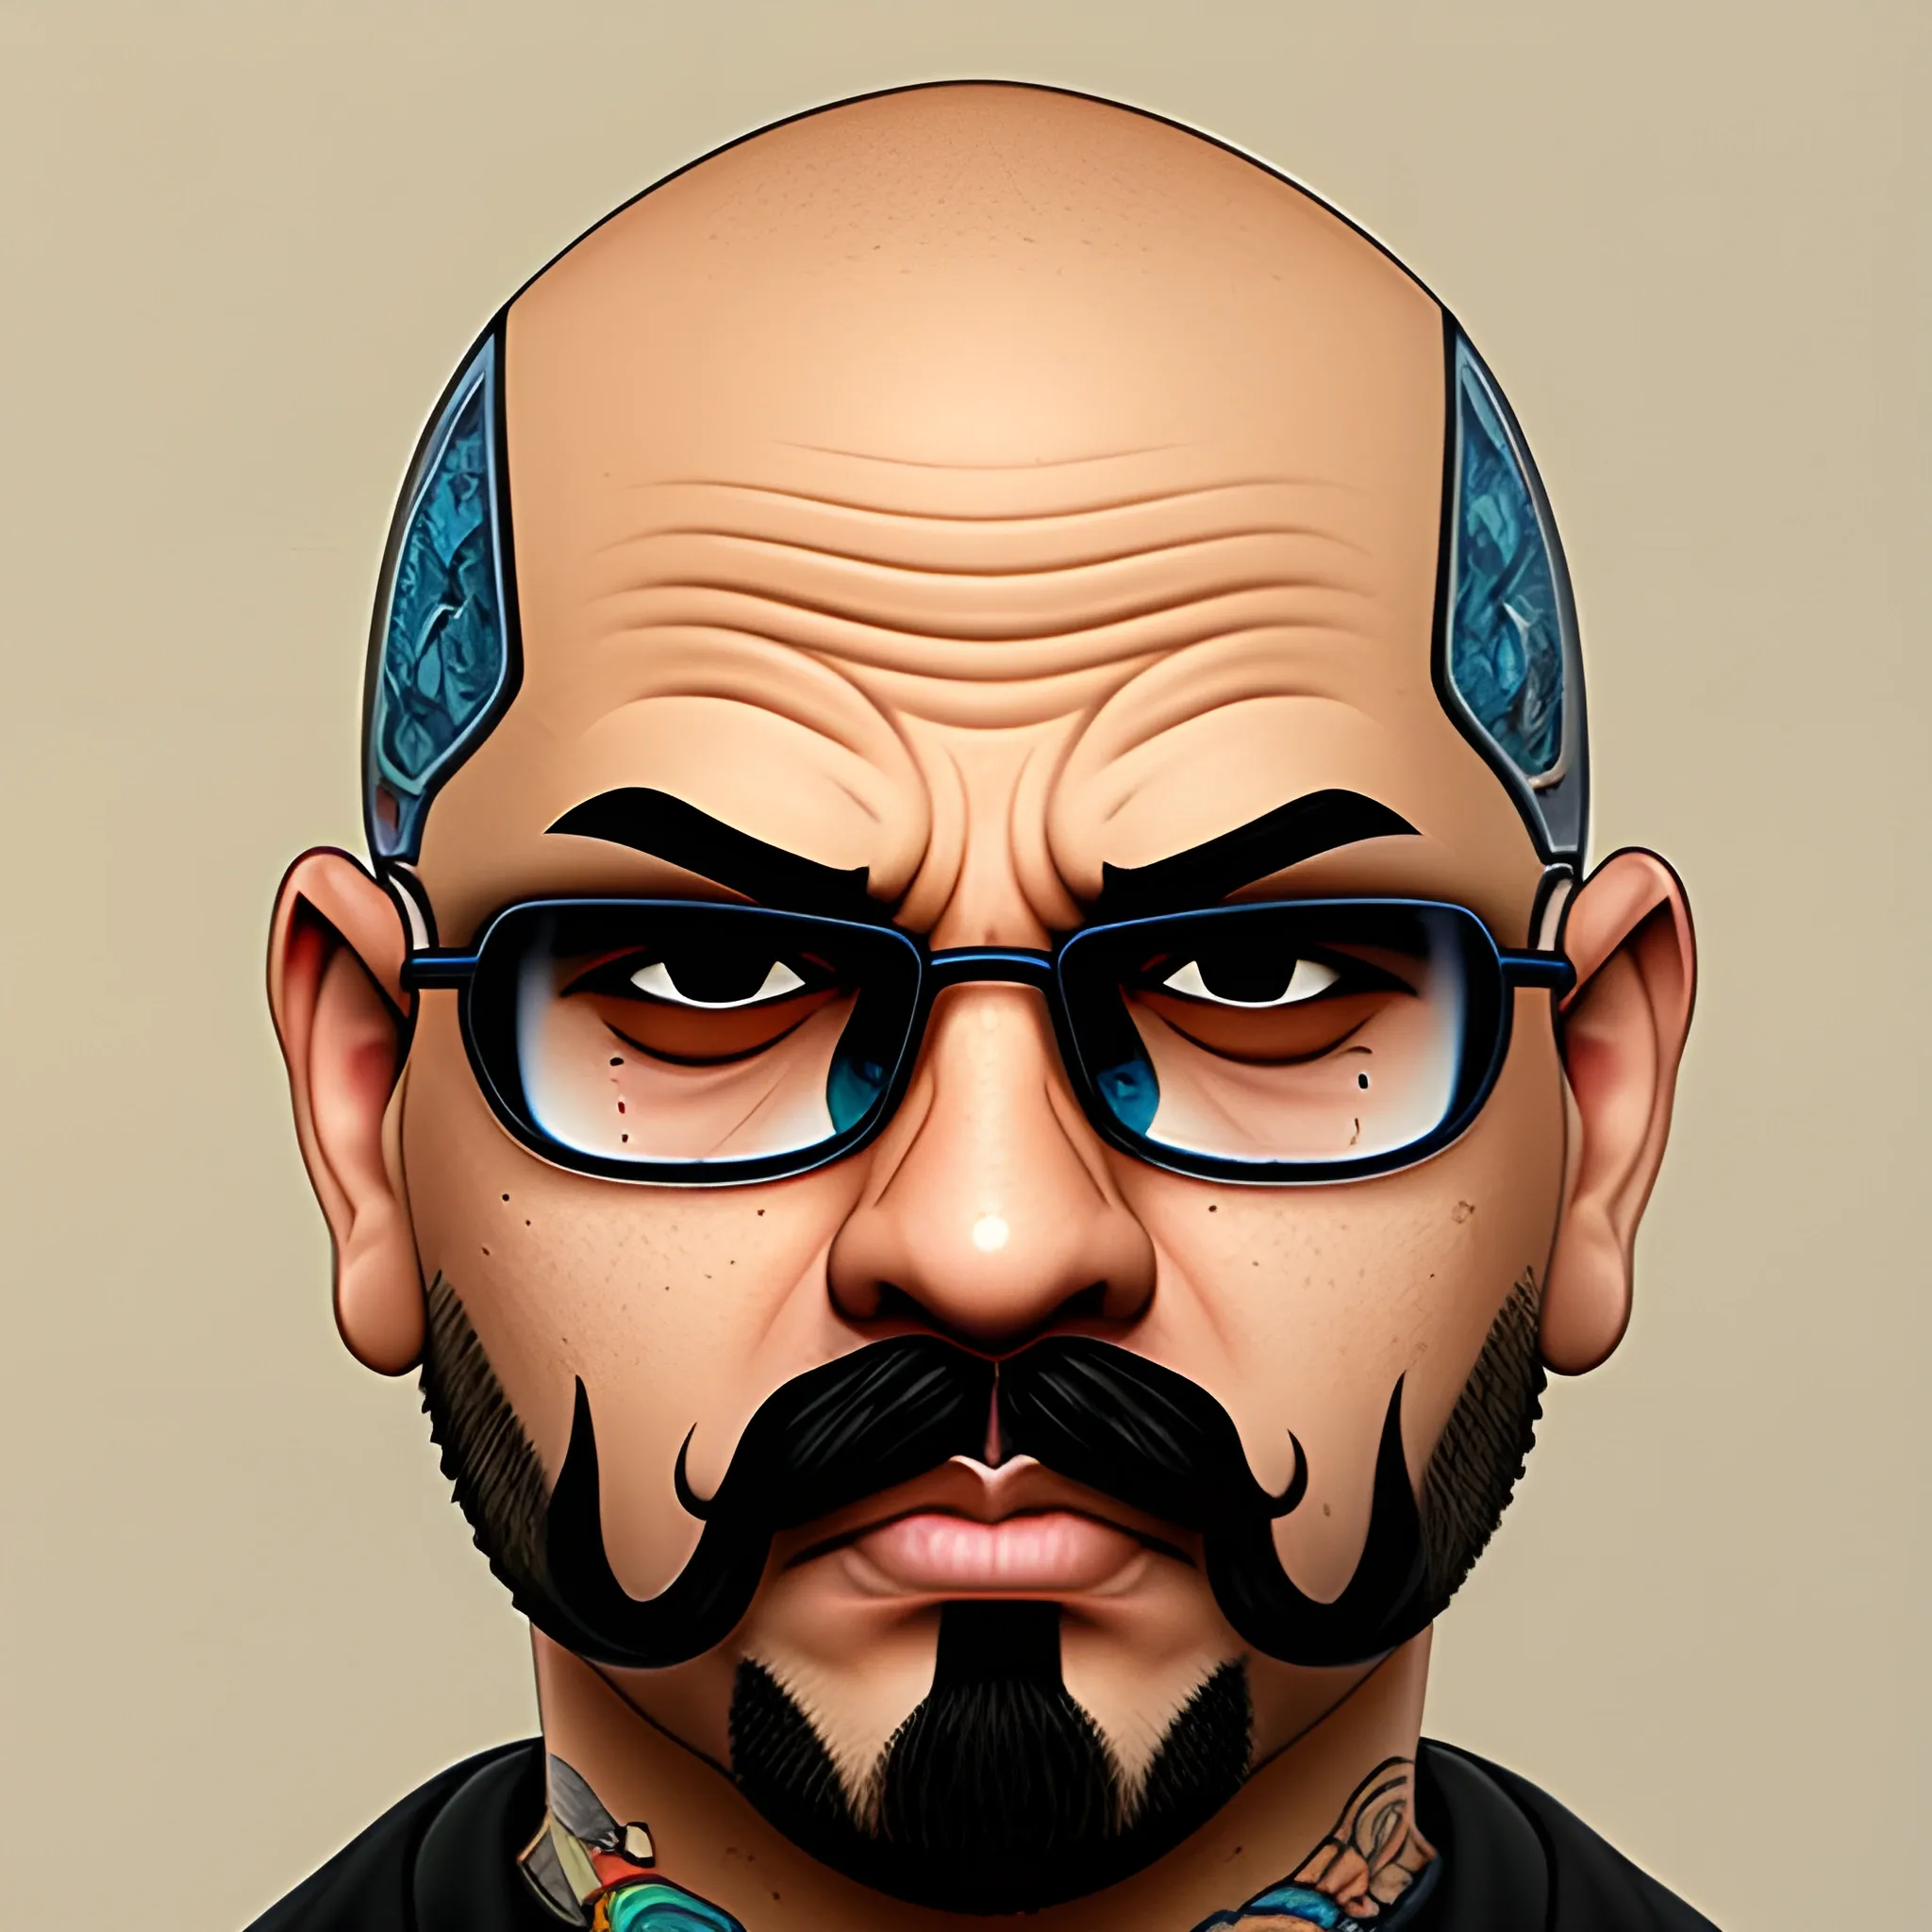 BALD CHOLO, MUSTACHE, CHICANO, 3D, FACE, AVATAR STYLE, GTA DRAWING STYLE, GTA ART STYLE, FRONT ON, WITHOUT GLASSES,